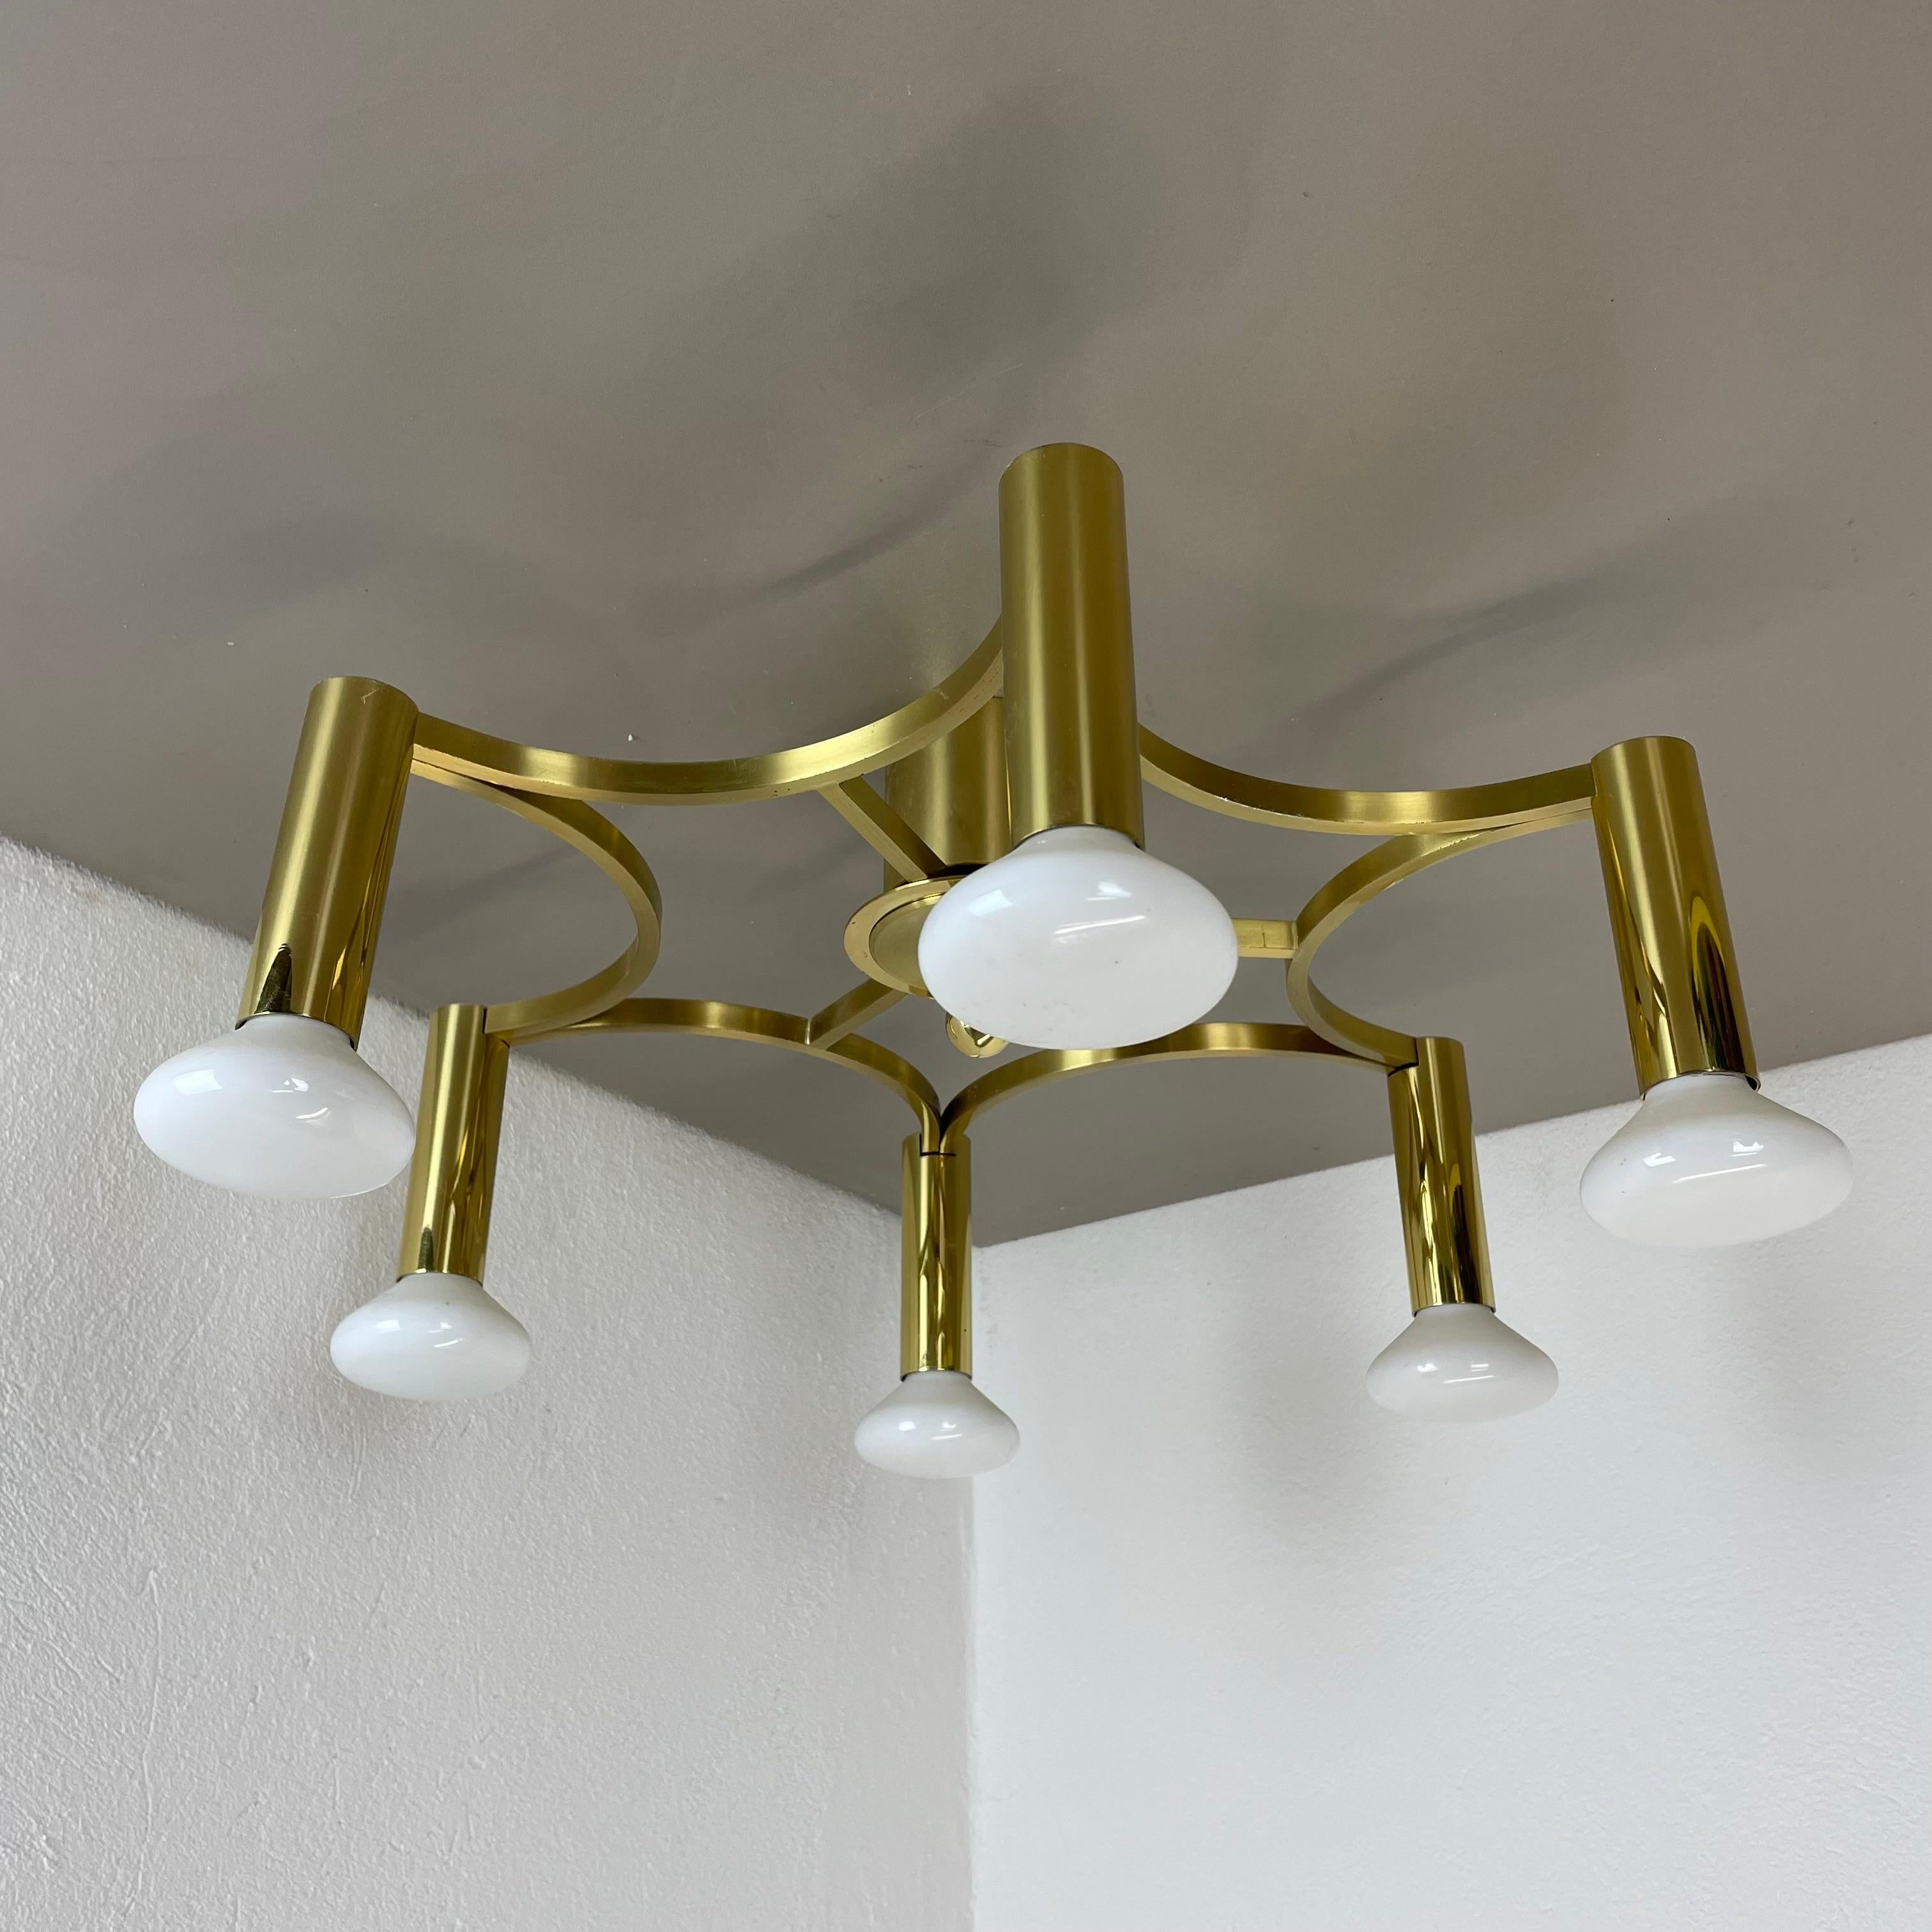 Article:

brass ceiling light, flush mount



Origin:

Italy



Age:

1960s




This vintage modernist ceiling light was produced in the 1960s in Italy. The lights is made of solid brass and has a fantastic floral structure with sockets for light